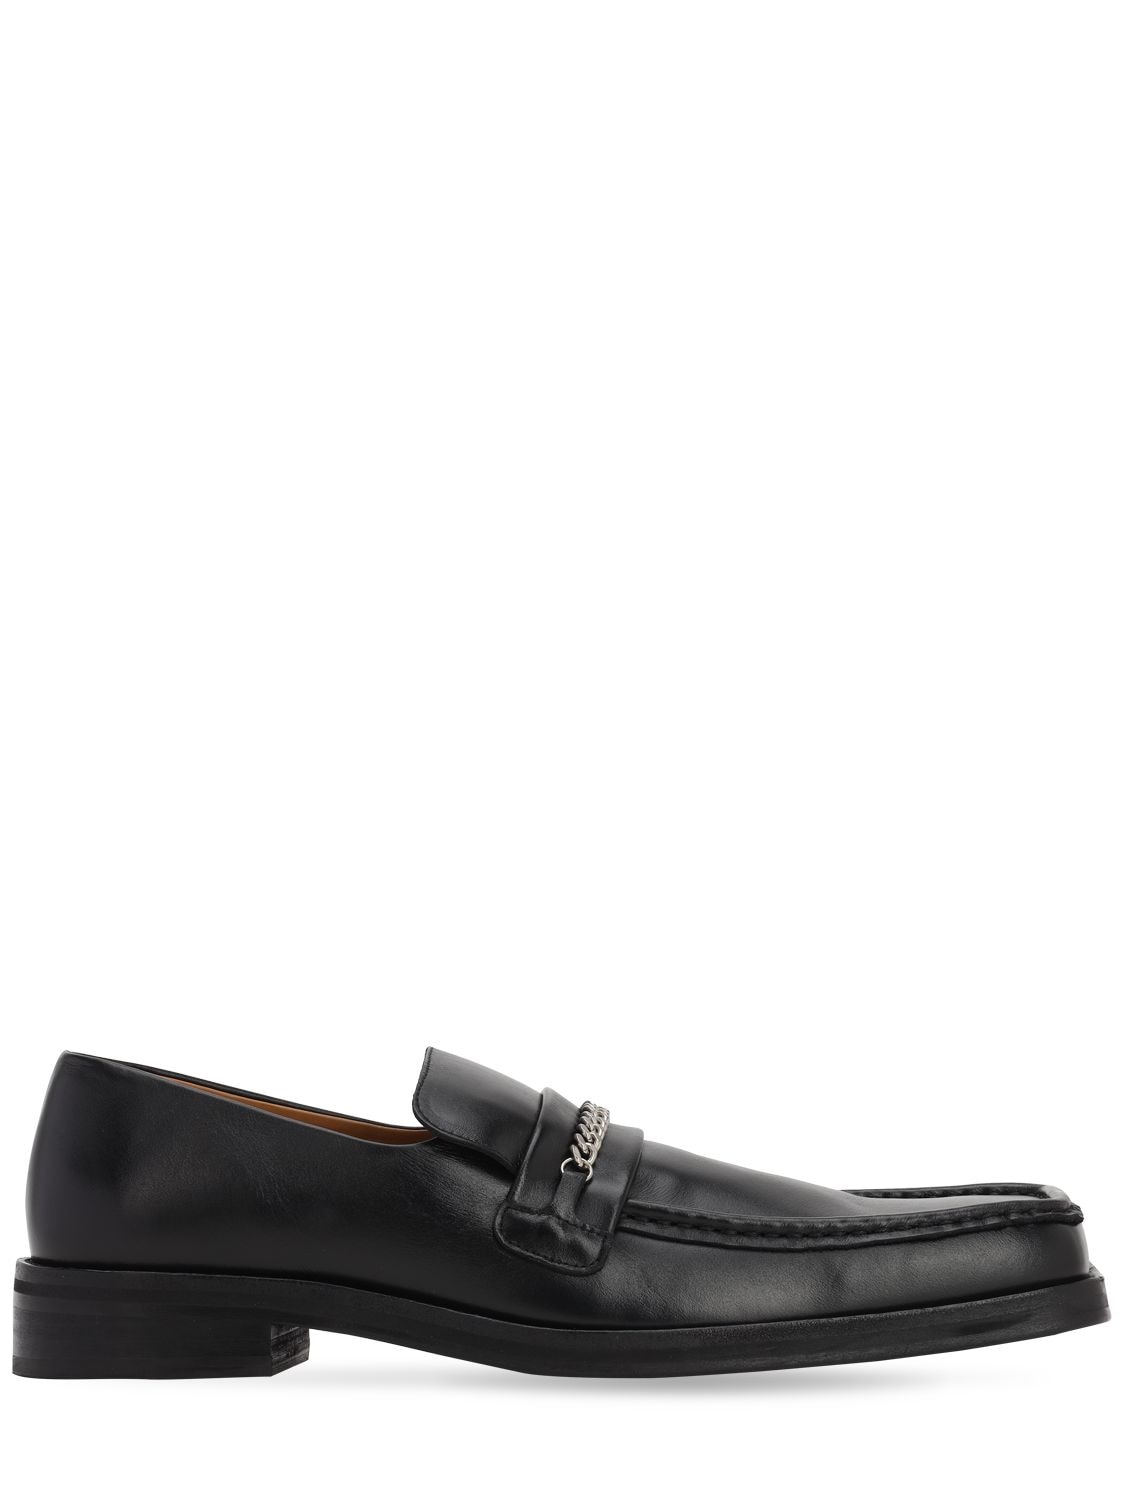 MARTINE ROSE 3.5CM LEATHER SQUARE TOE LOAFERS